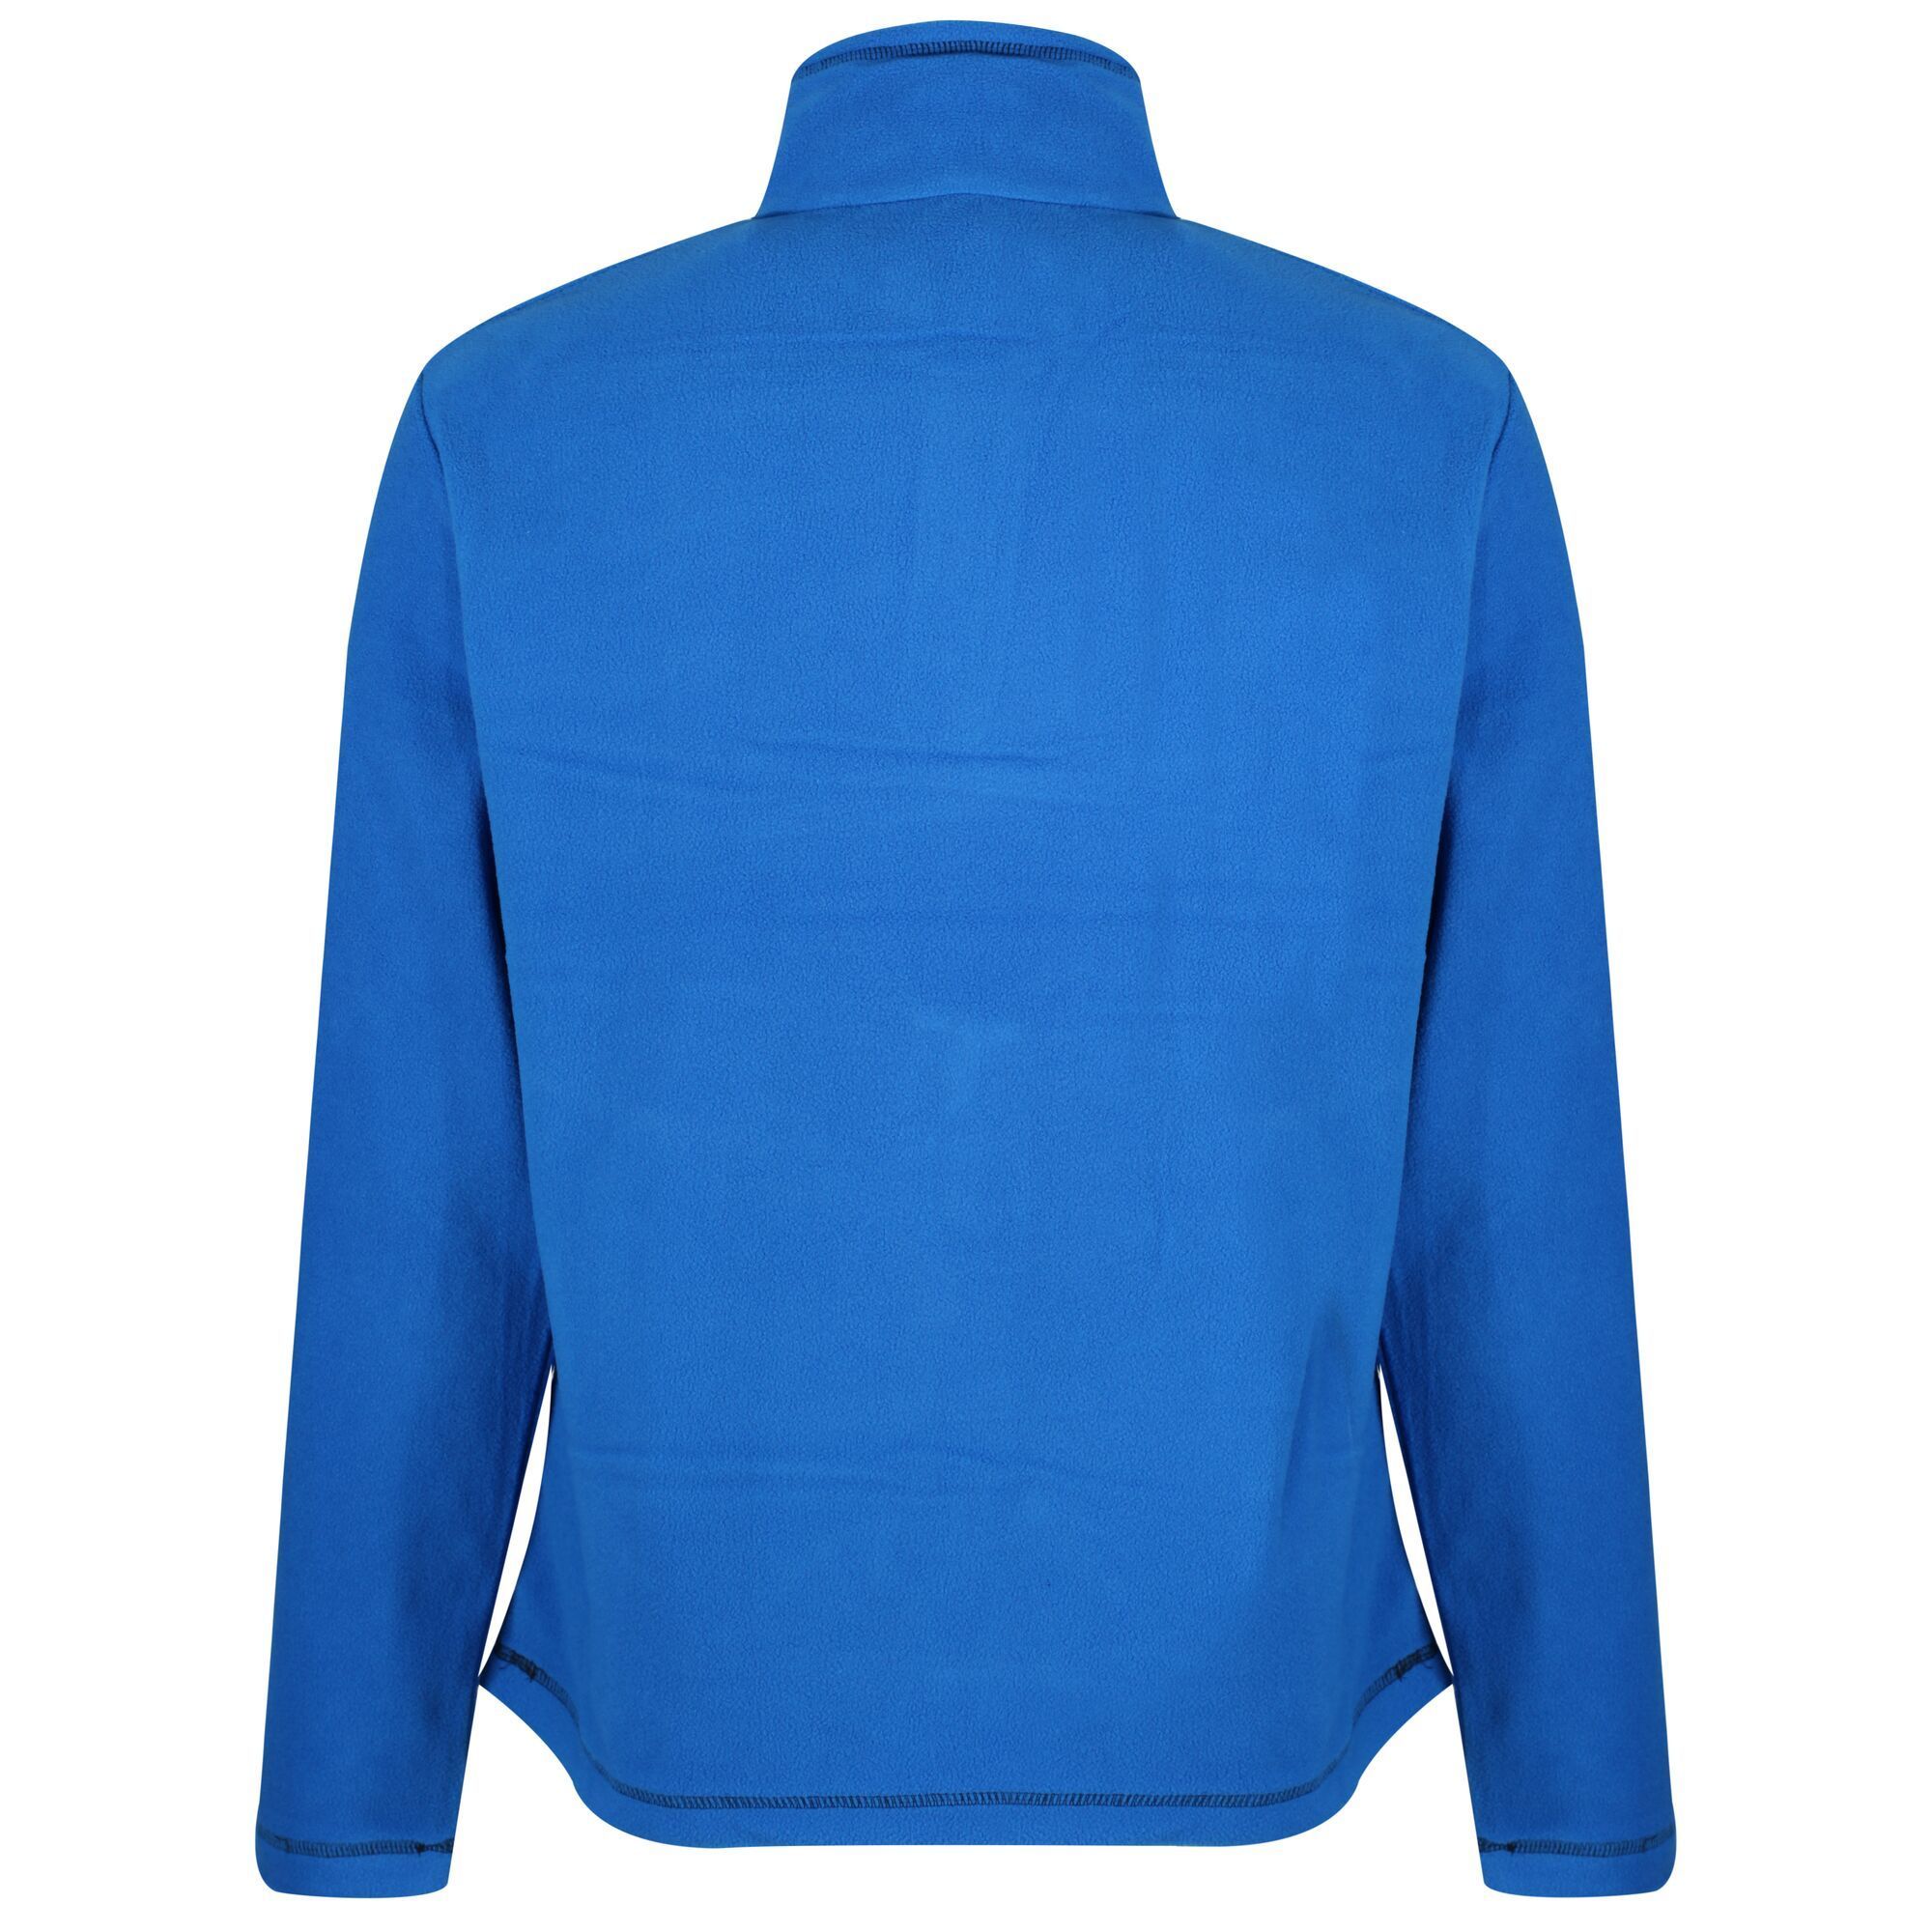 170gsm Symmetry fleece. 1 side brushed, 1 side anti pill. 100% Polyester. Regatta Mens sizing (chest approx): XS (35-36in/89-91.5cm), S (37-38in/94-96.5cm), M (39-40in/99-101.5cm), L (41-42in/104-106.5cm), XL (43-44in/109-112cm), XXL (46-48in/117-122cm), XXXL (49-51in/124.5-129.5cm), XXXXL (52-54in/132-137cm), XXXXXL (55-57in/140-145cm).